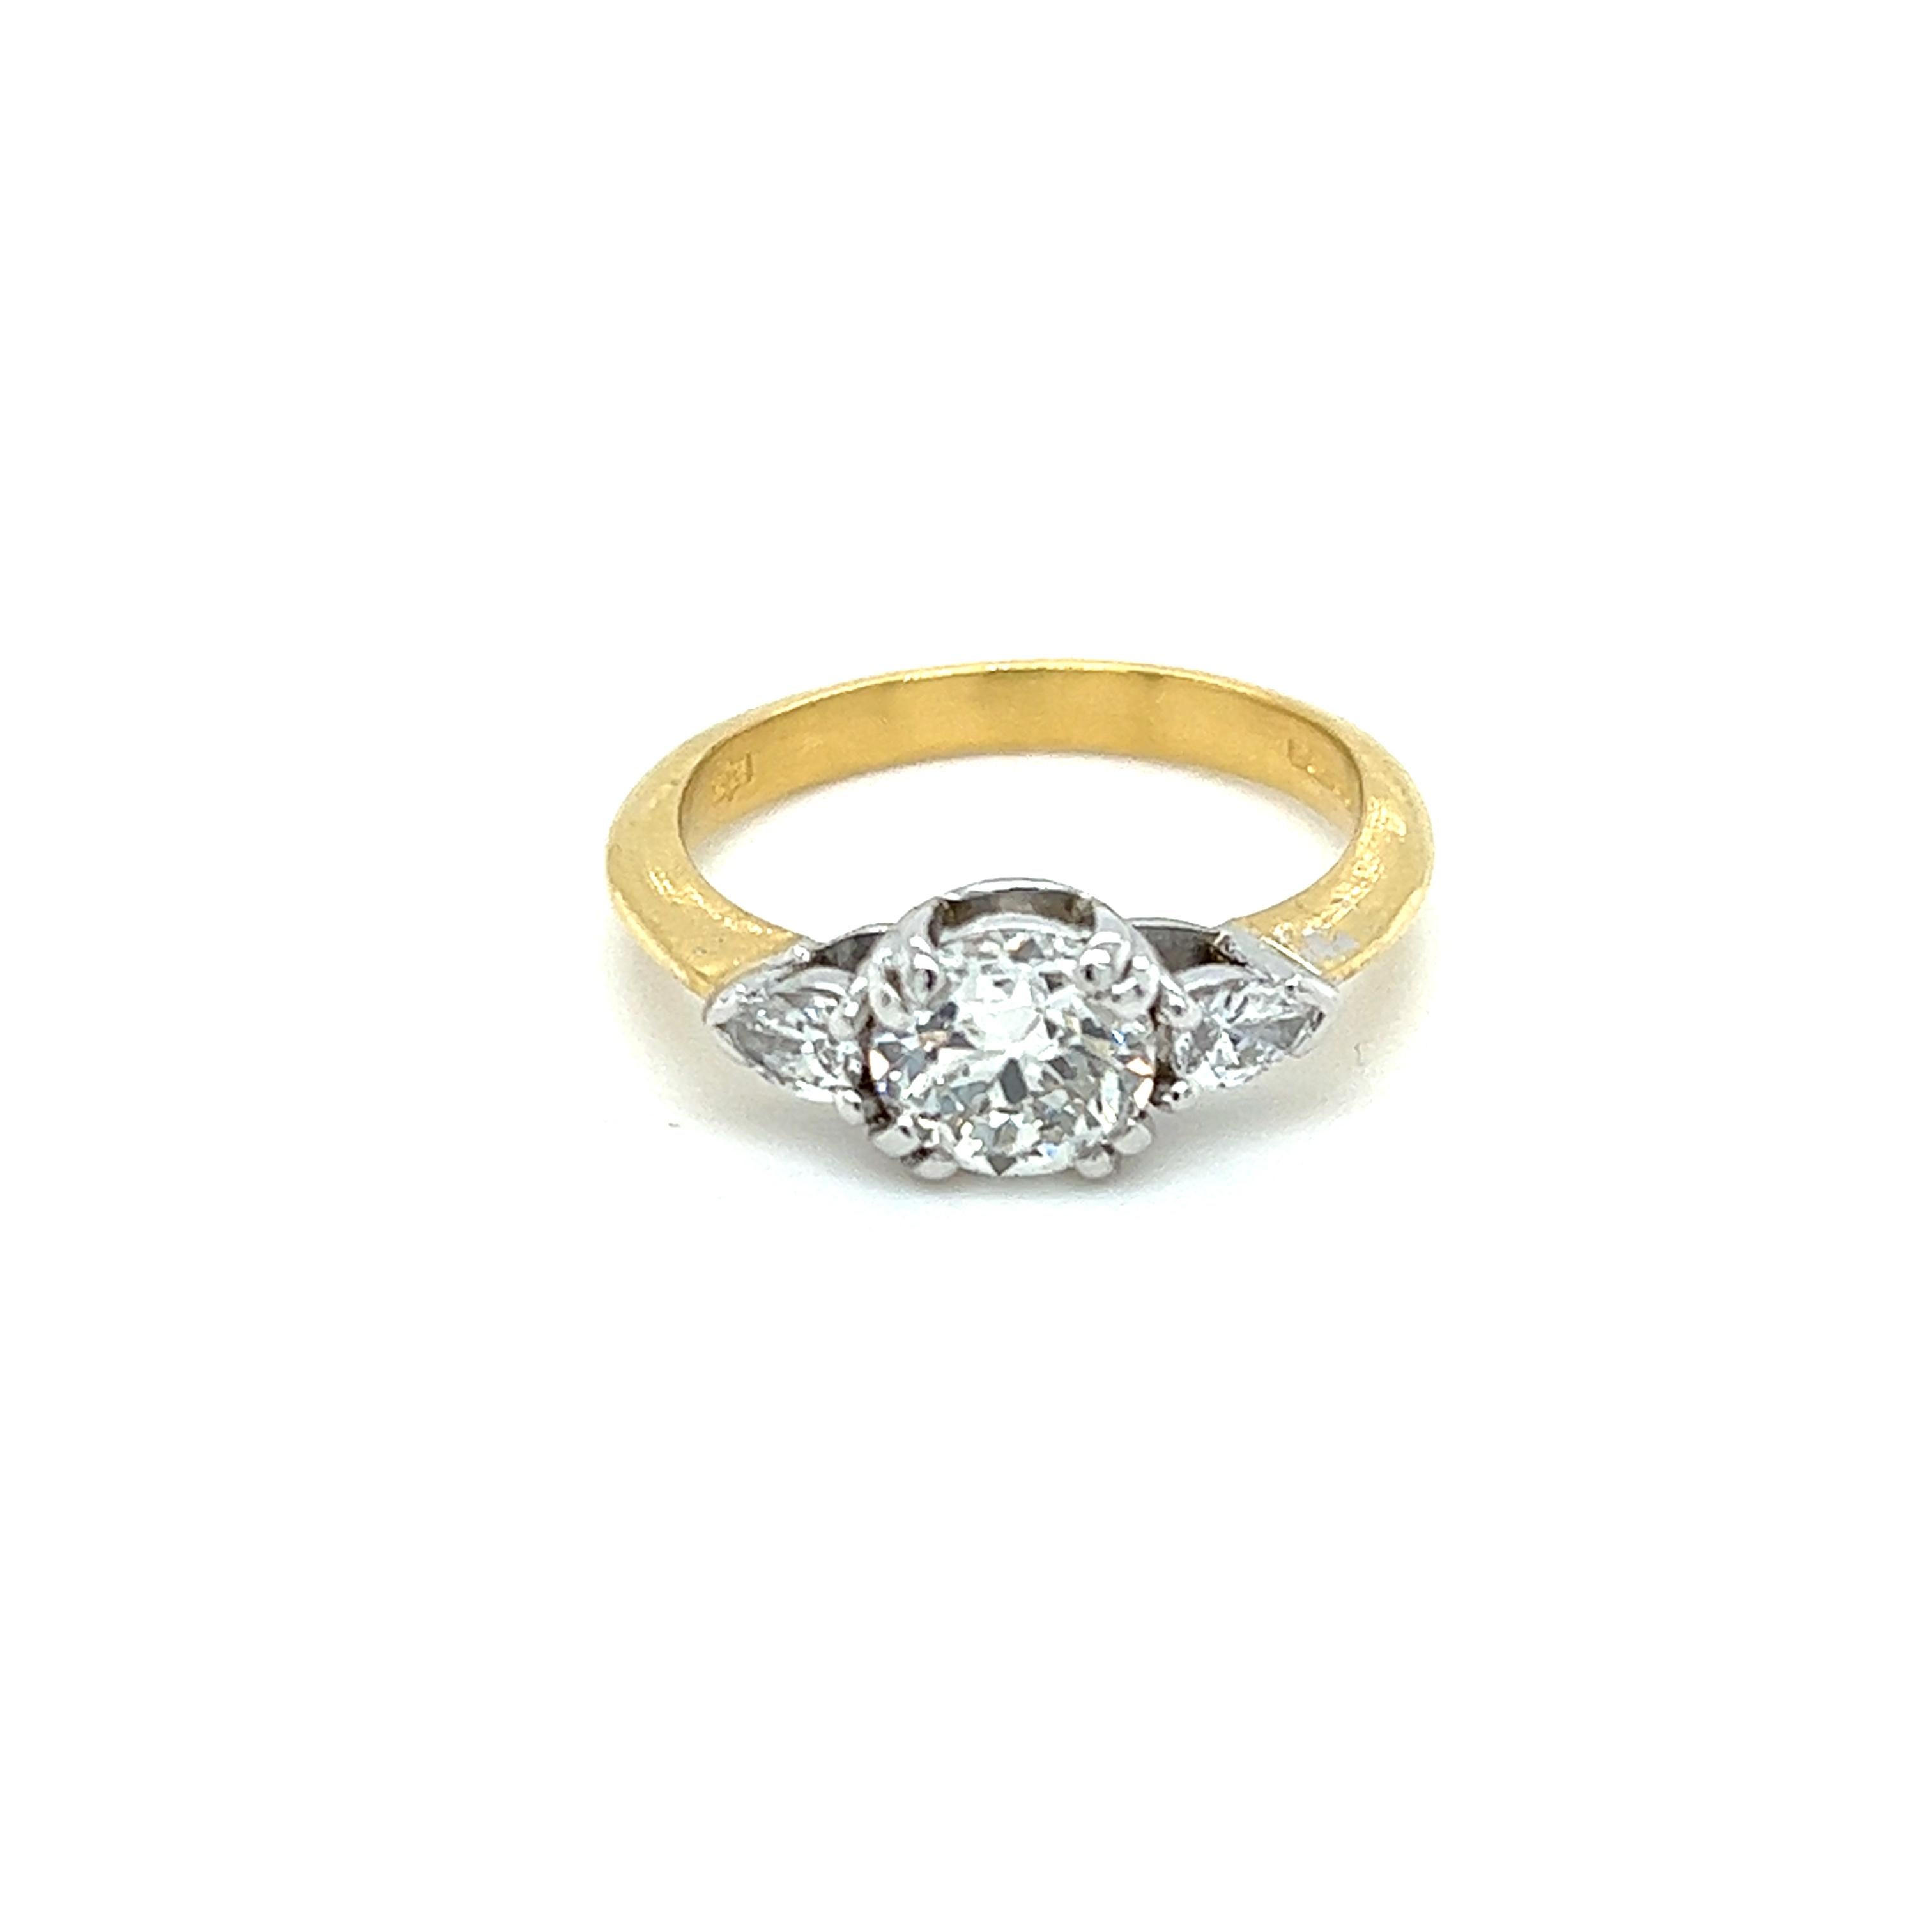 1.42ctw Old European Cut Diamond Engagement Ring in 18k White and Yellow Gold For Sale 1